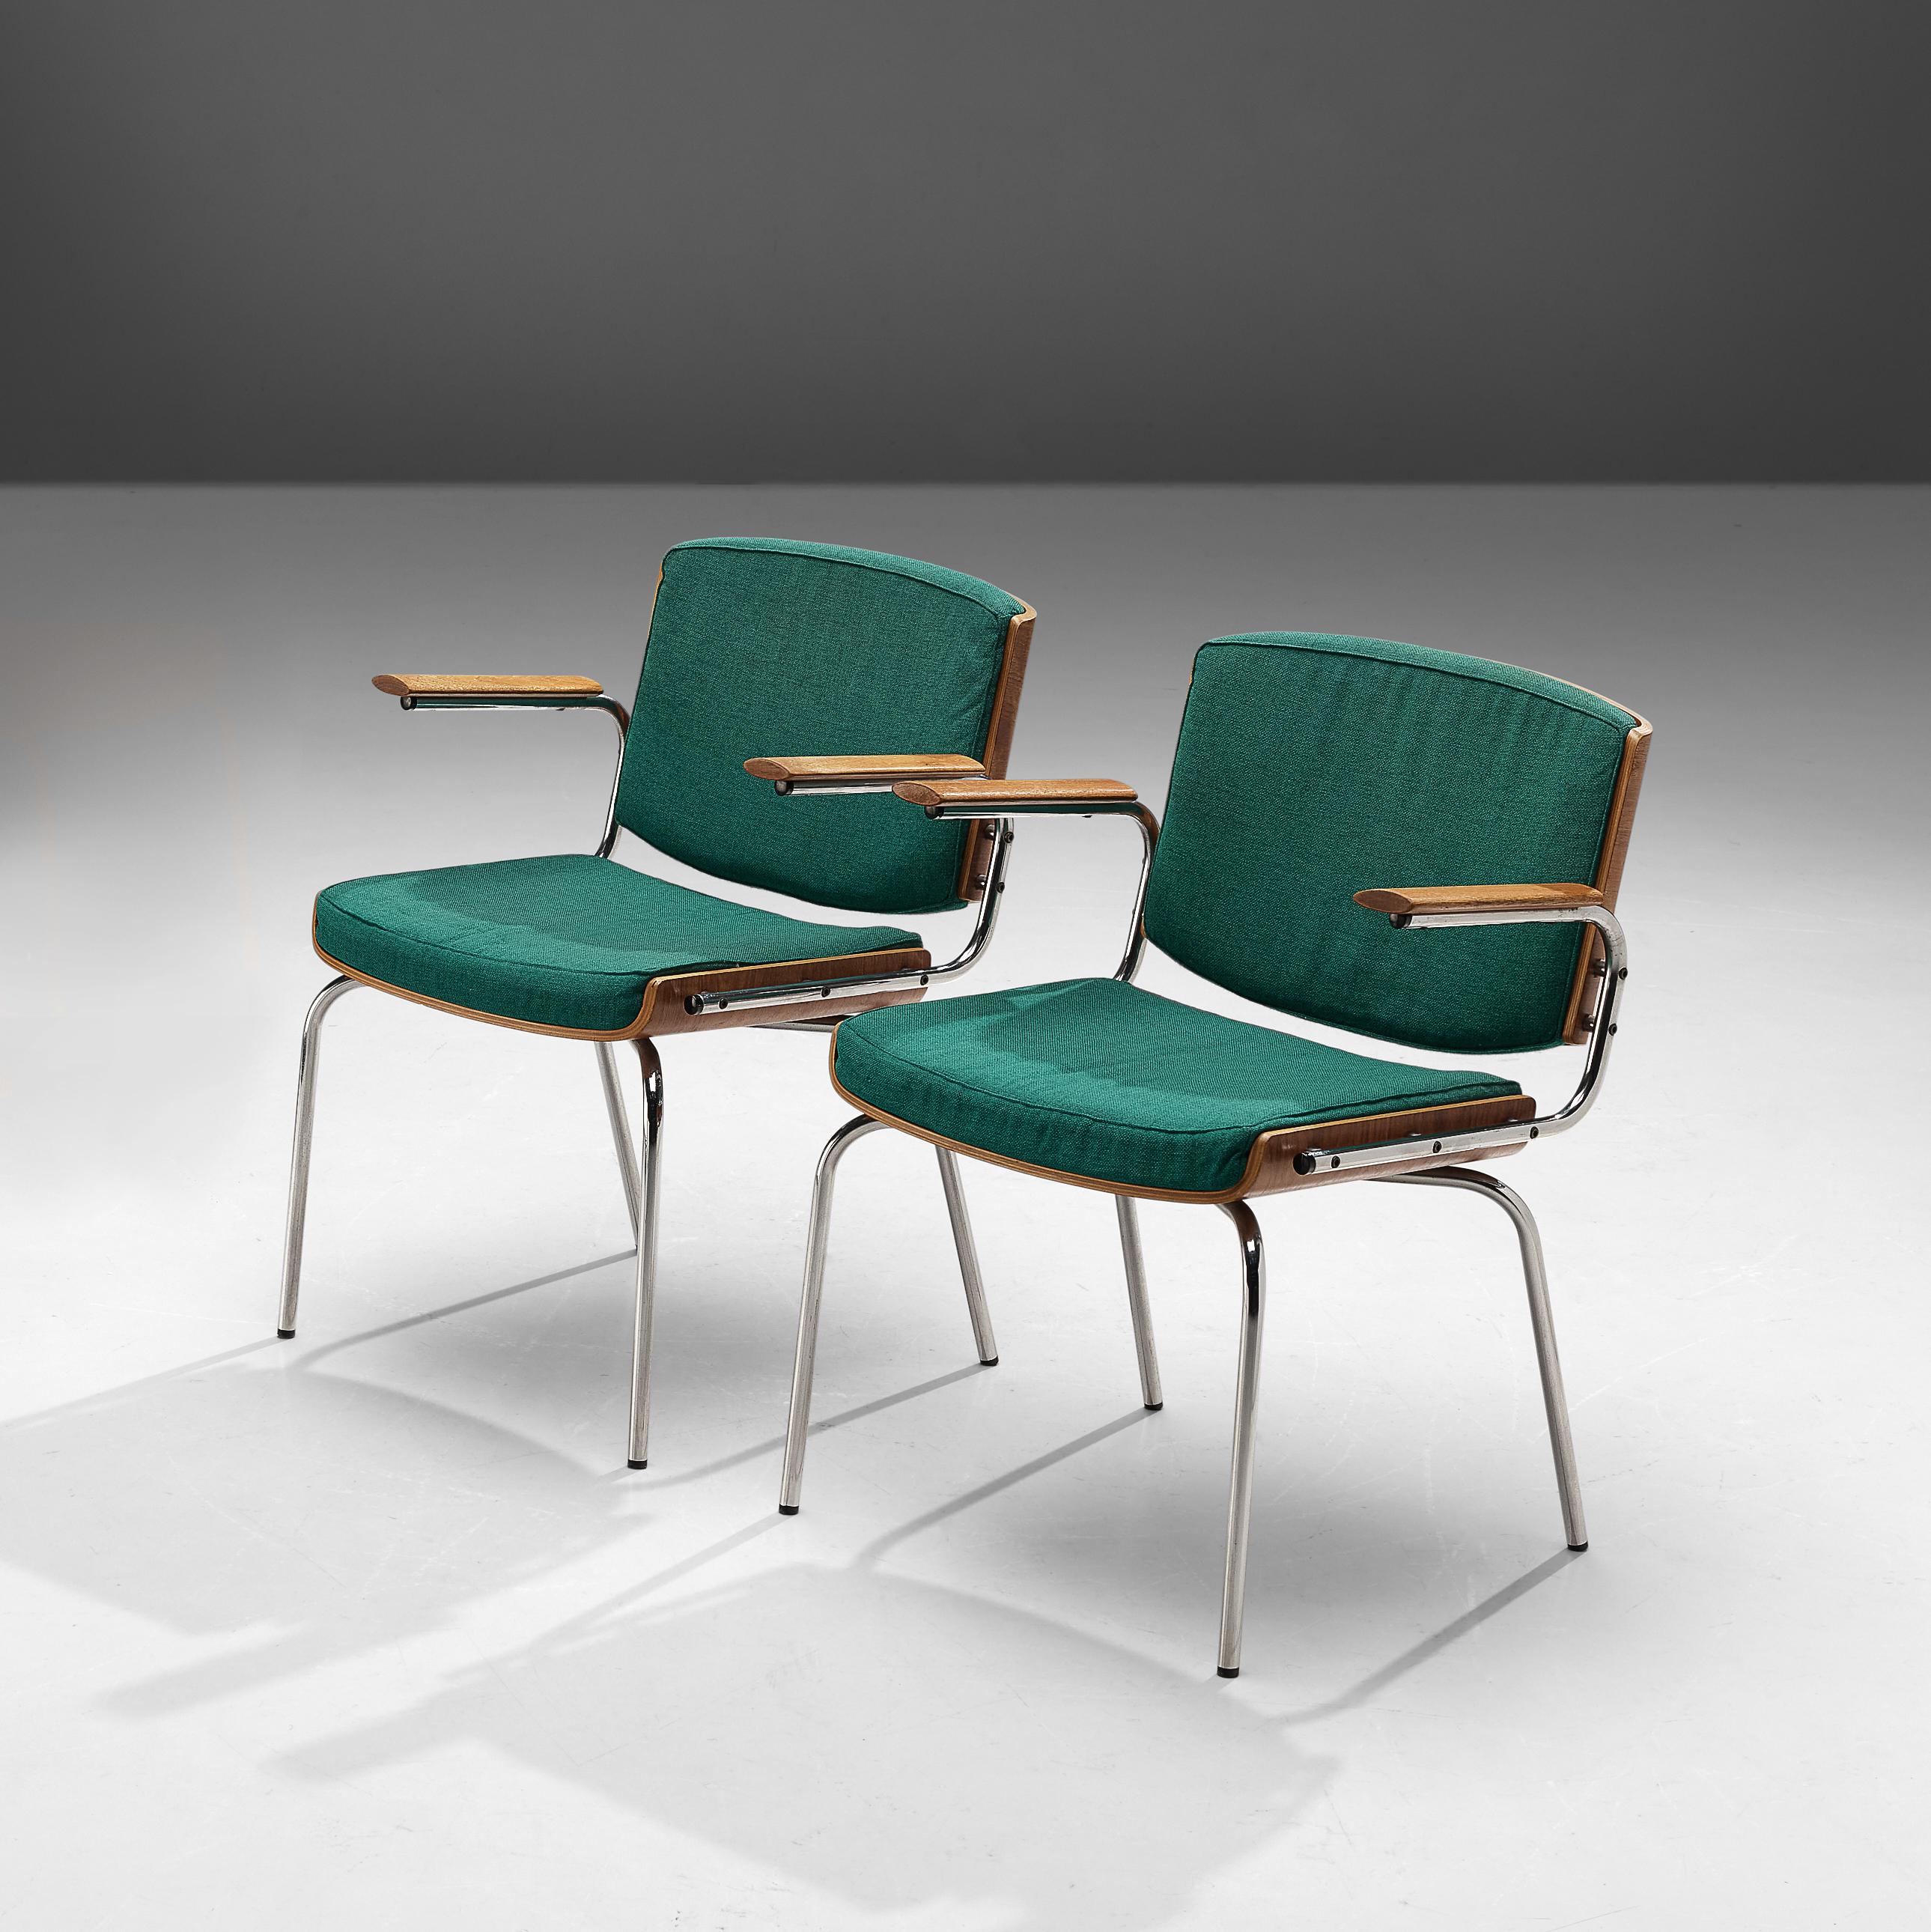 Late 20th Century Danish Pair of Dining Chairs in Teak and Green Upholstery For Sale